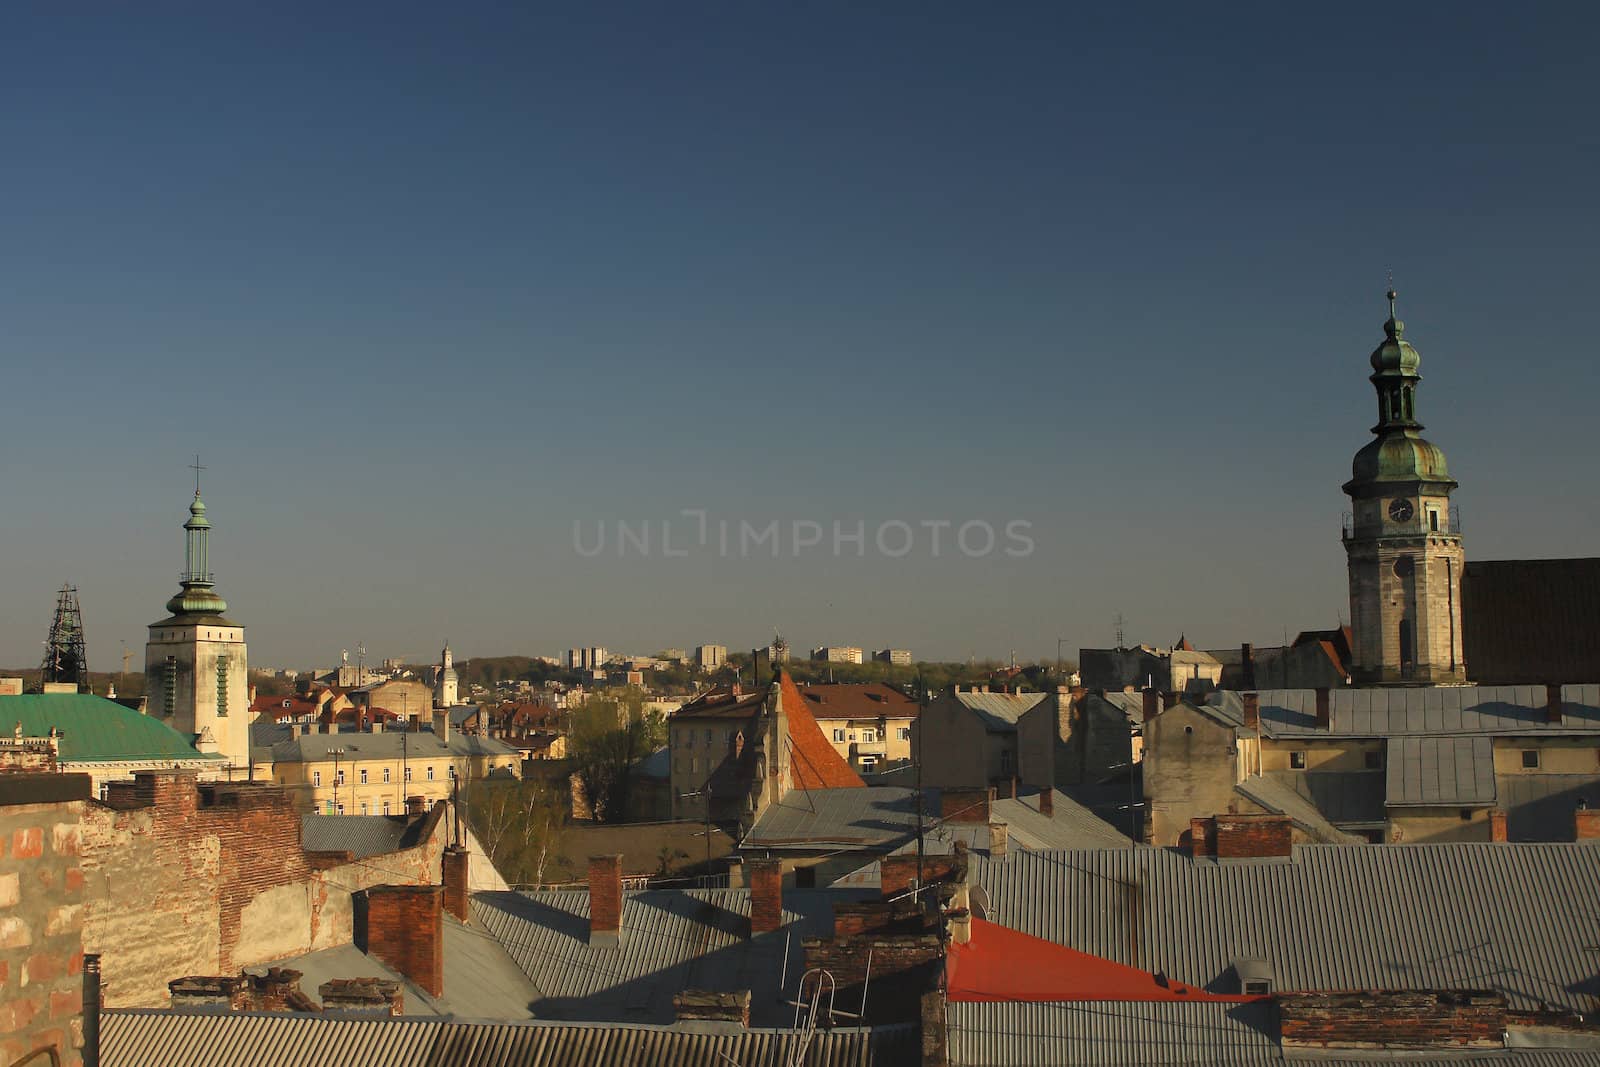 View of the old city of Lviv - the city's rooftops and the Bernardine Monastery